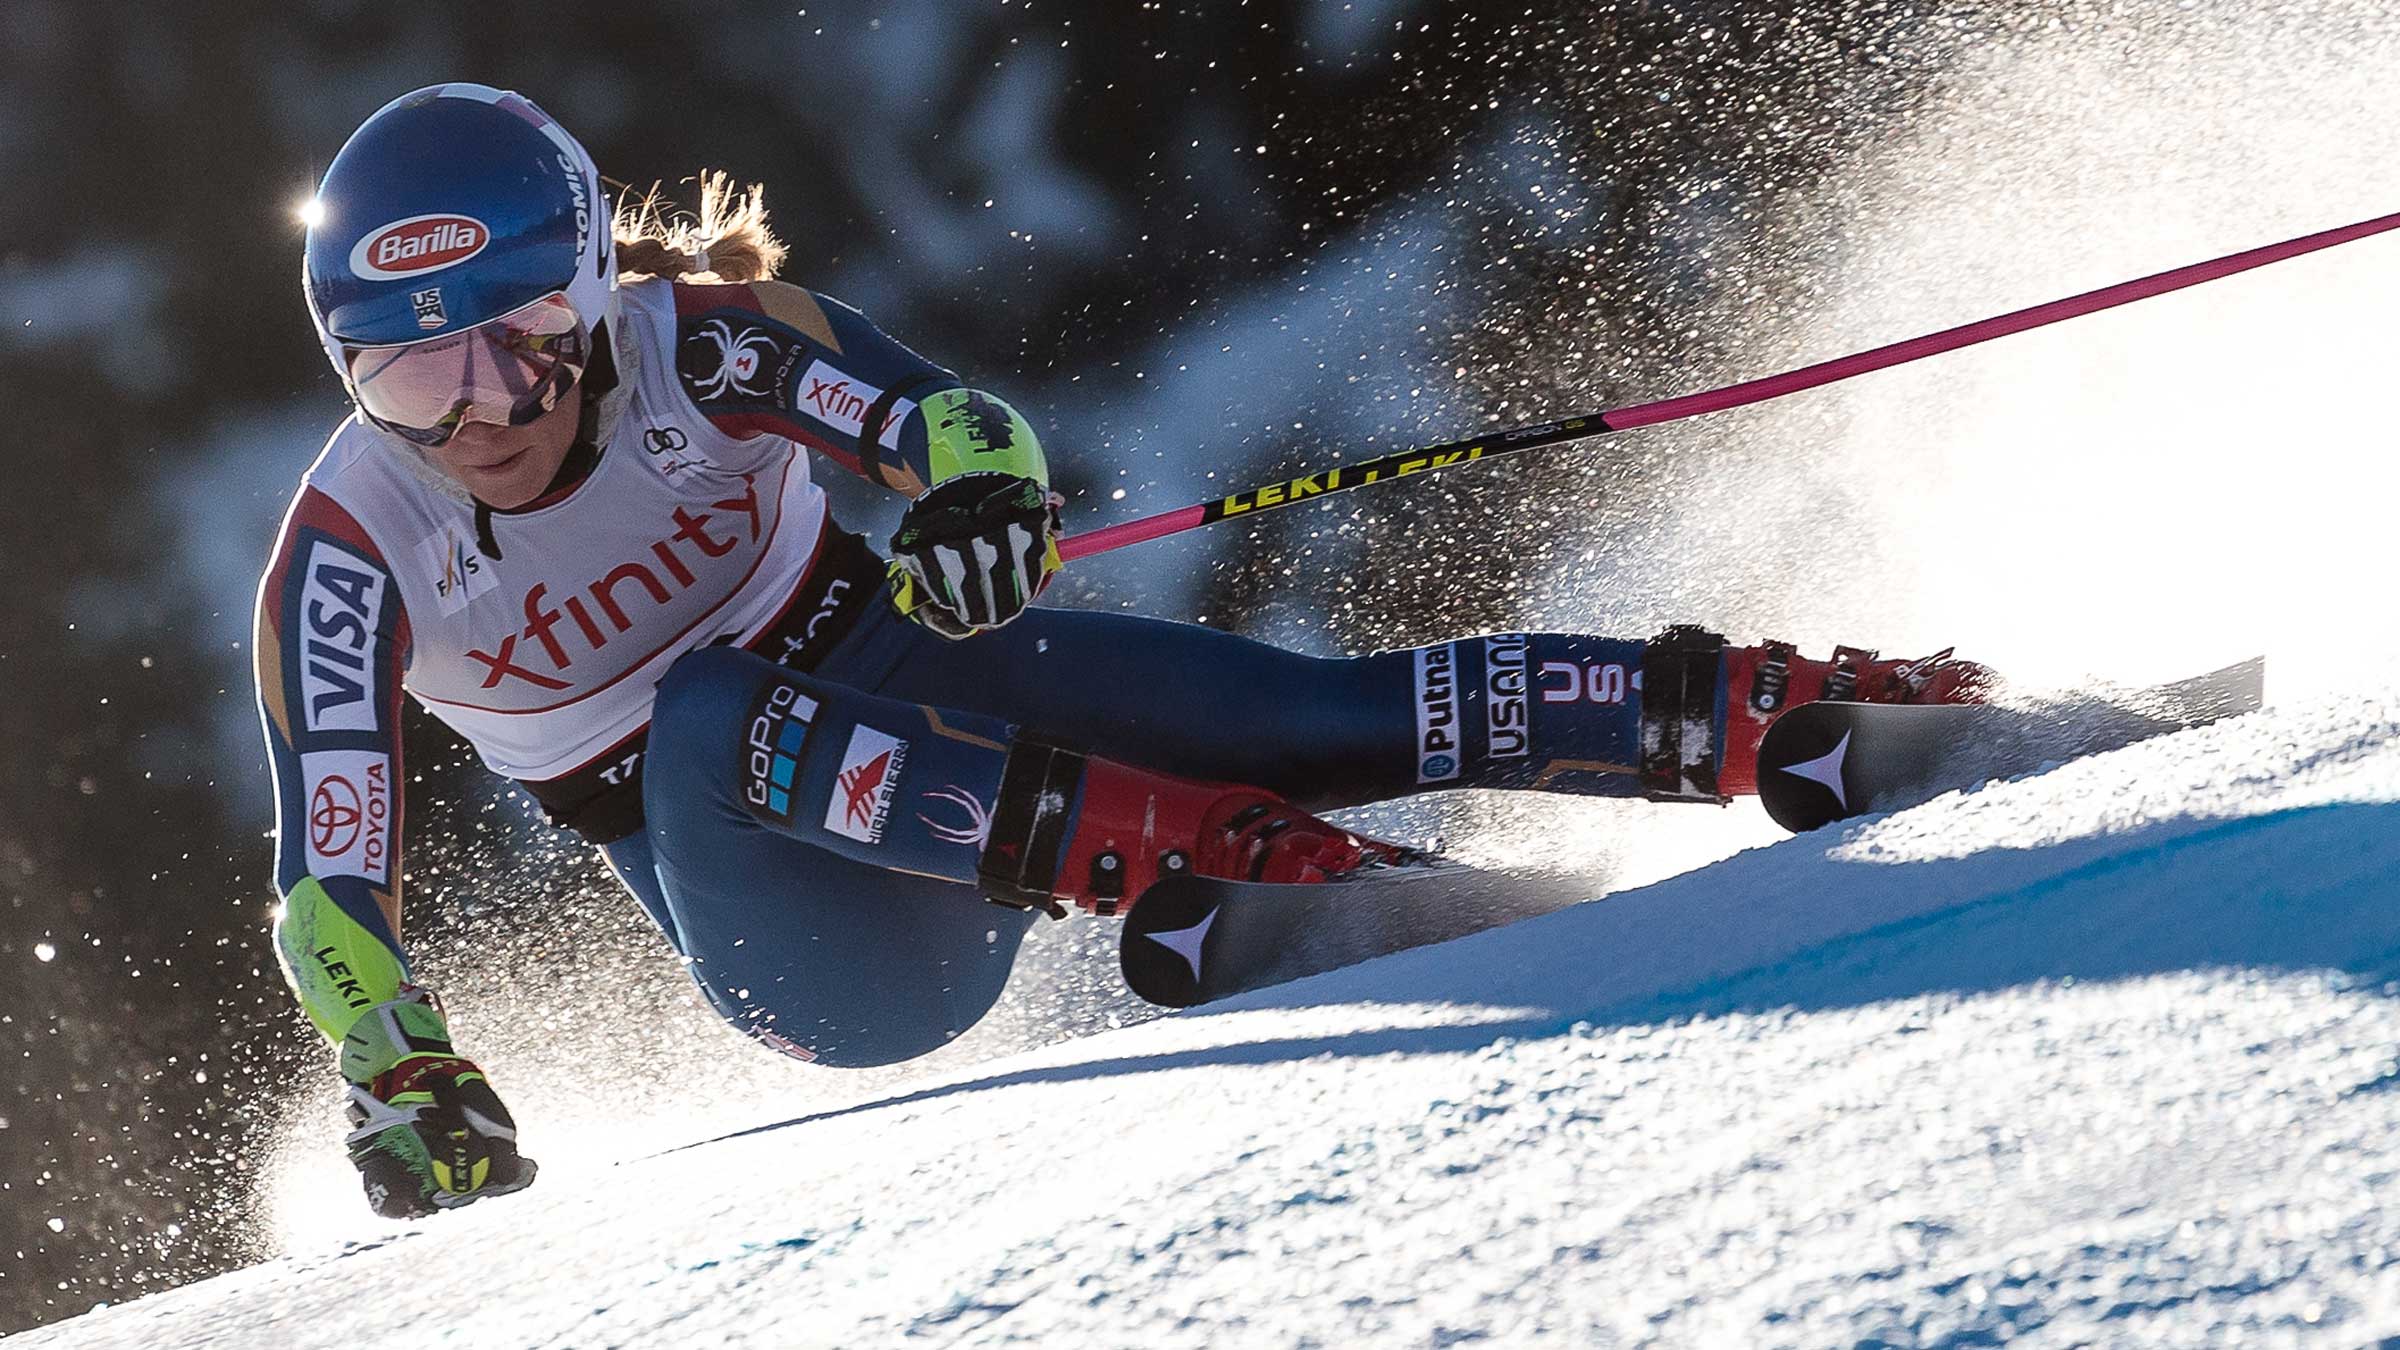 How to Watch the FIS Alpine Skiing World Cup Online